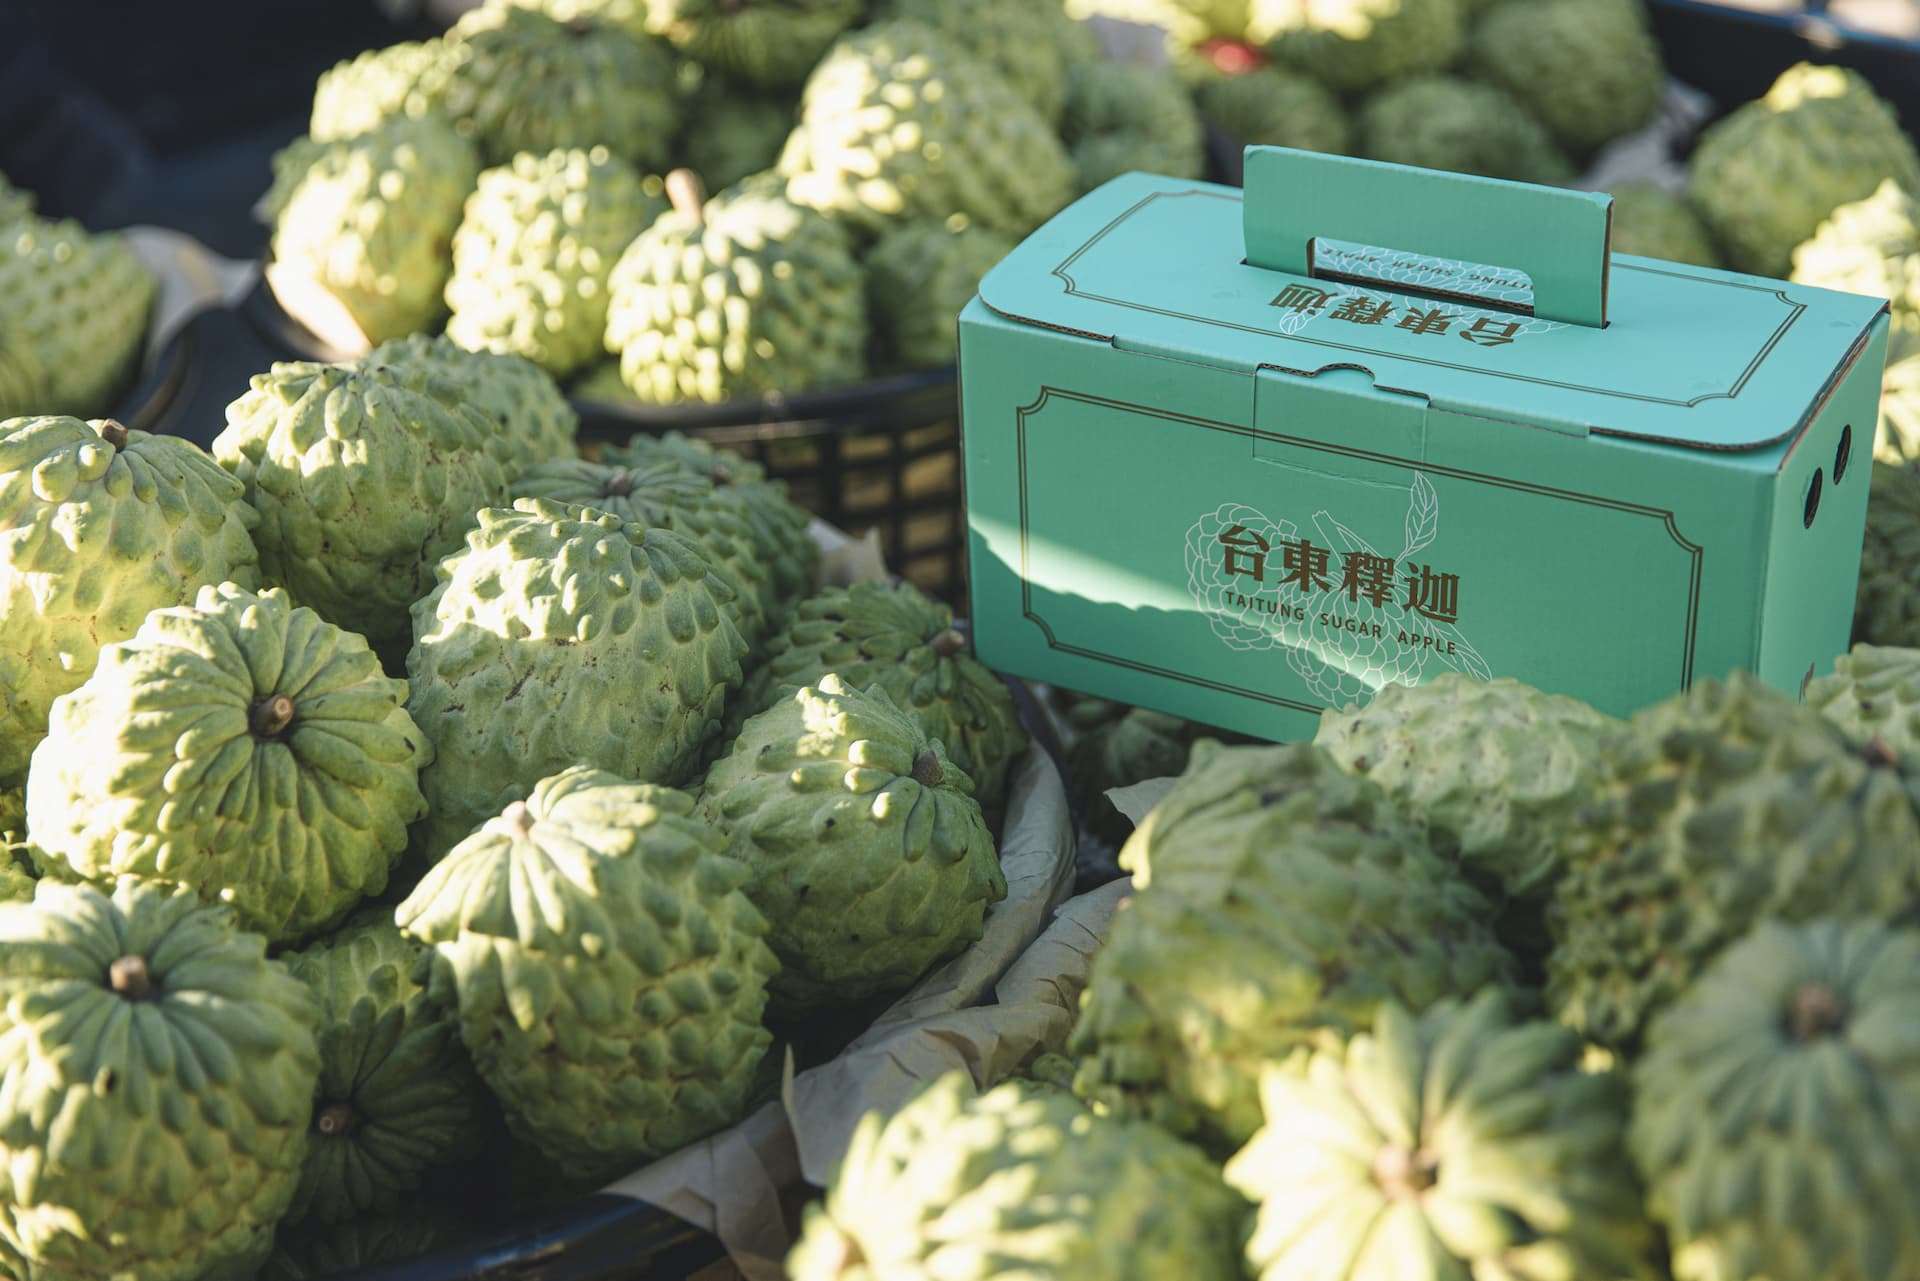 Bring the Sugar Apples Home! The Must-buy Taitung Gift of 2022